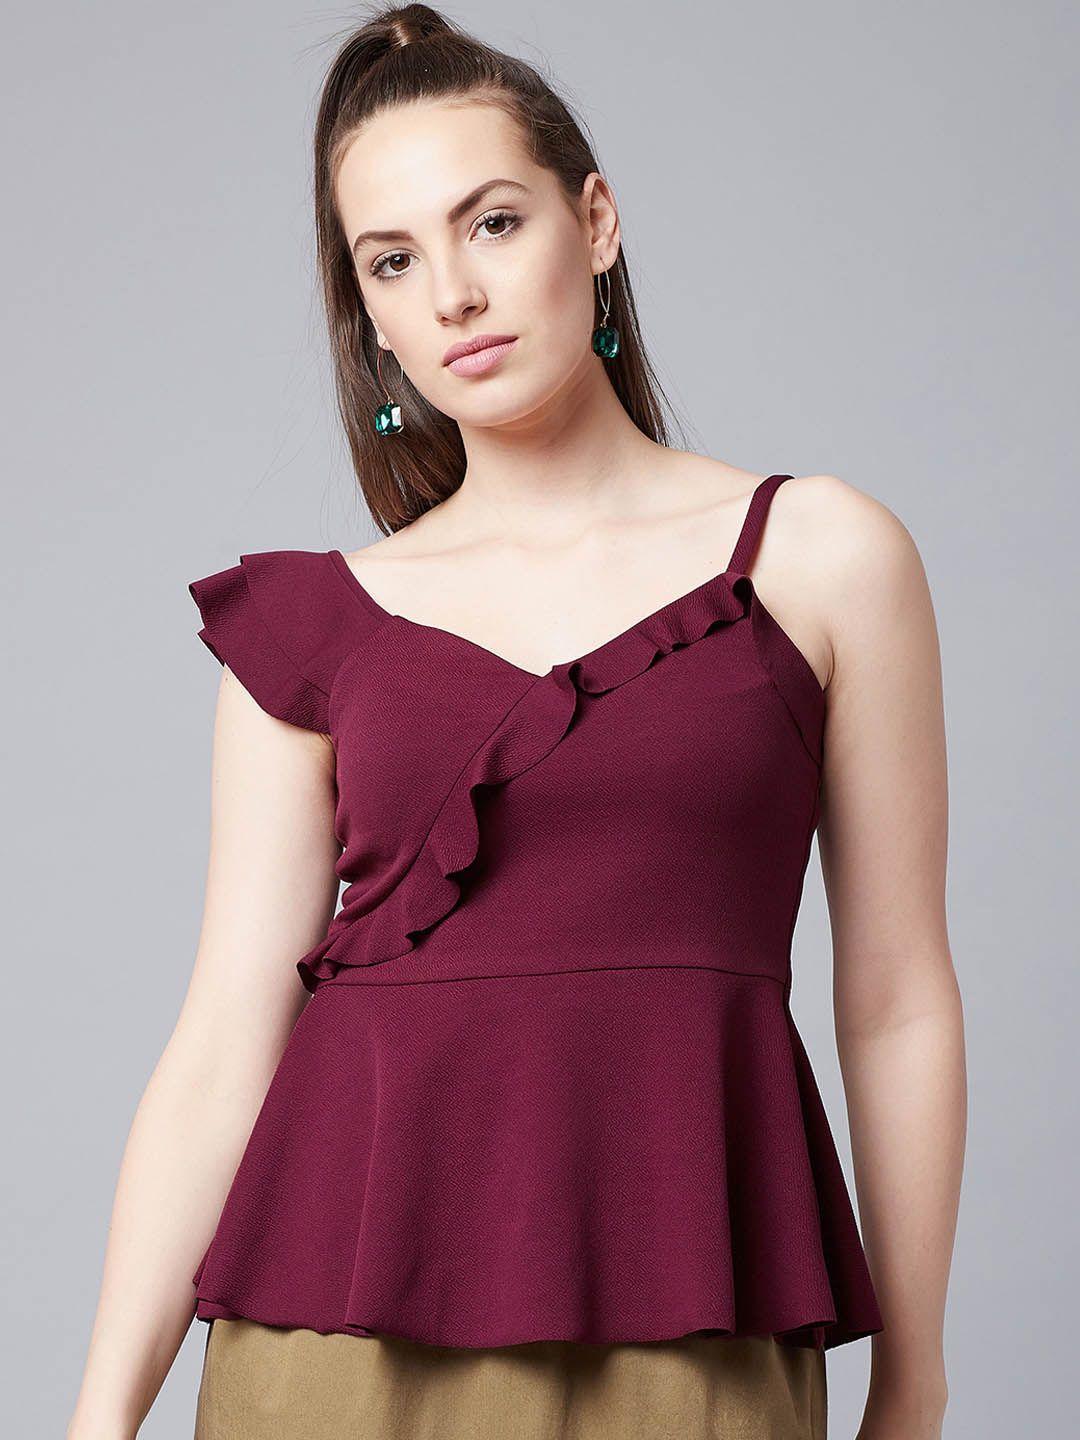 athena-women-burgundy-solid-peplum-top-with-ruffle-details